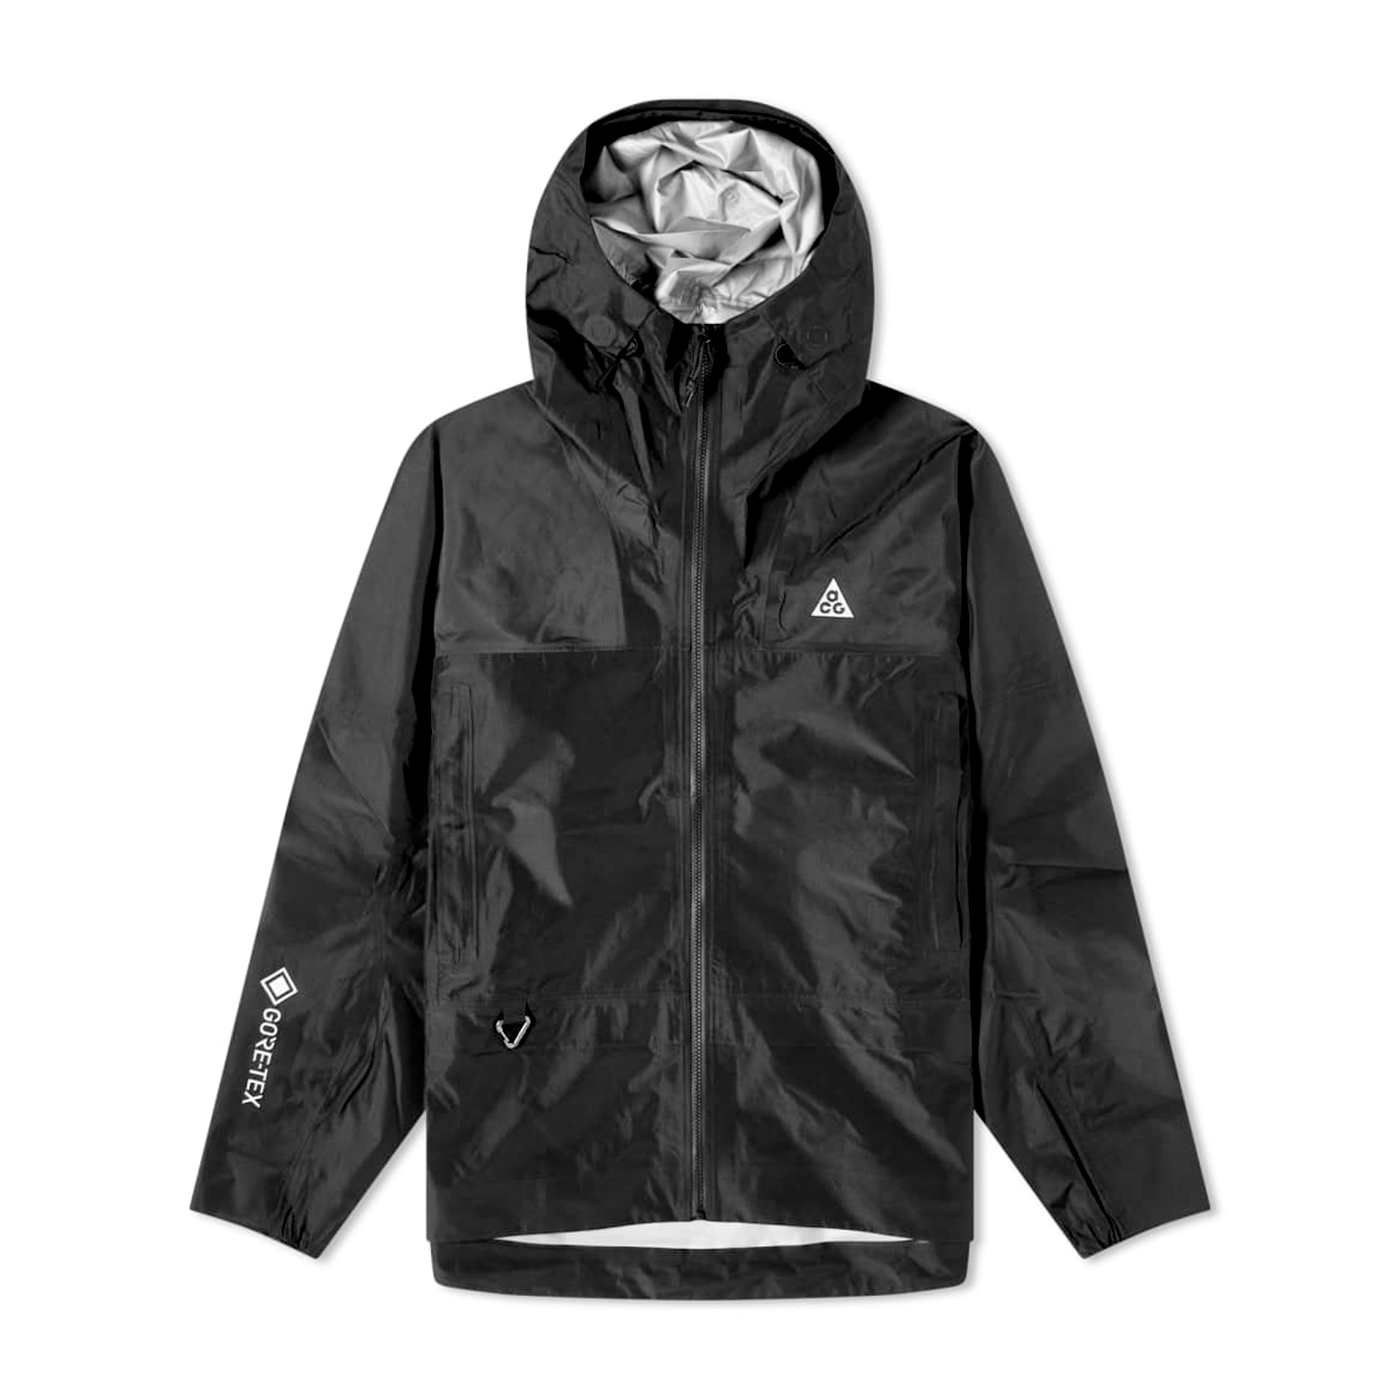 Storm-Fit AVD ACG "Chain of Craters" GTX Jacket